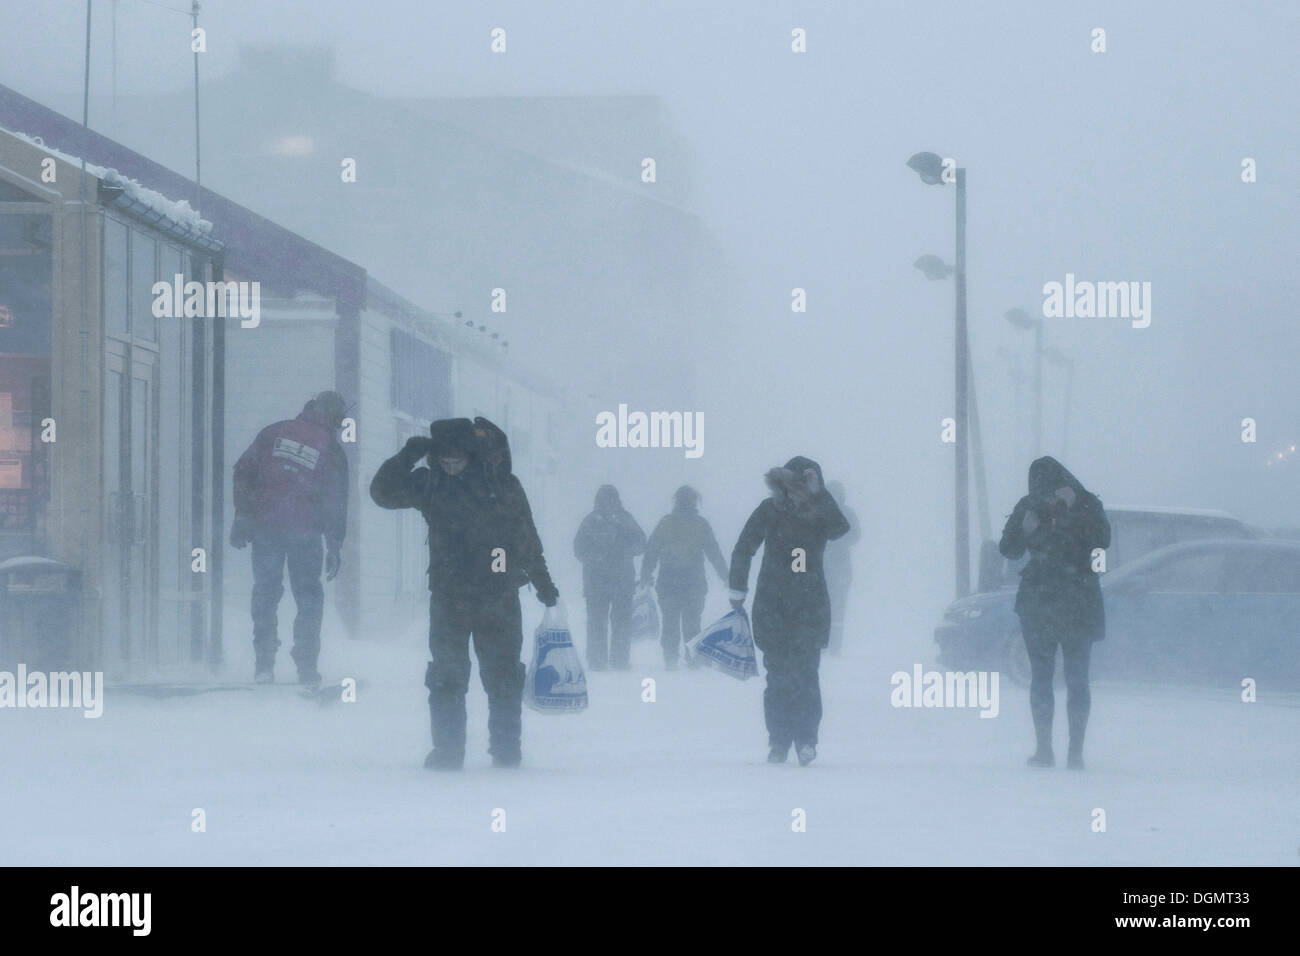 Passers-by in a snow-storm in the centre of the village of Longyearbyen, Spitsbergen, Svalbard, Norway, Europe Stock Photo